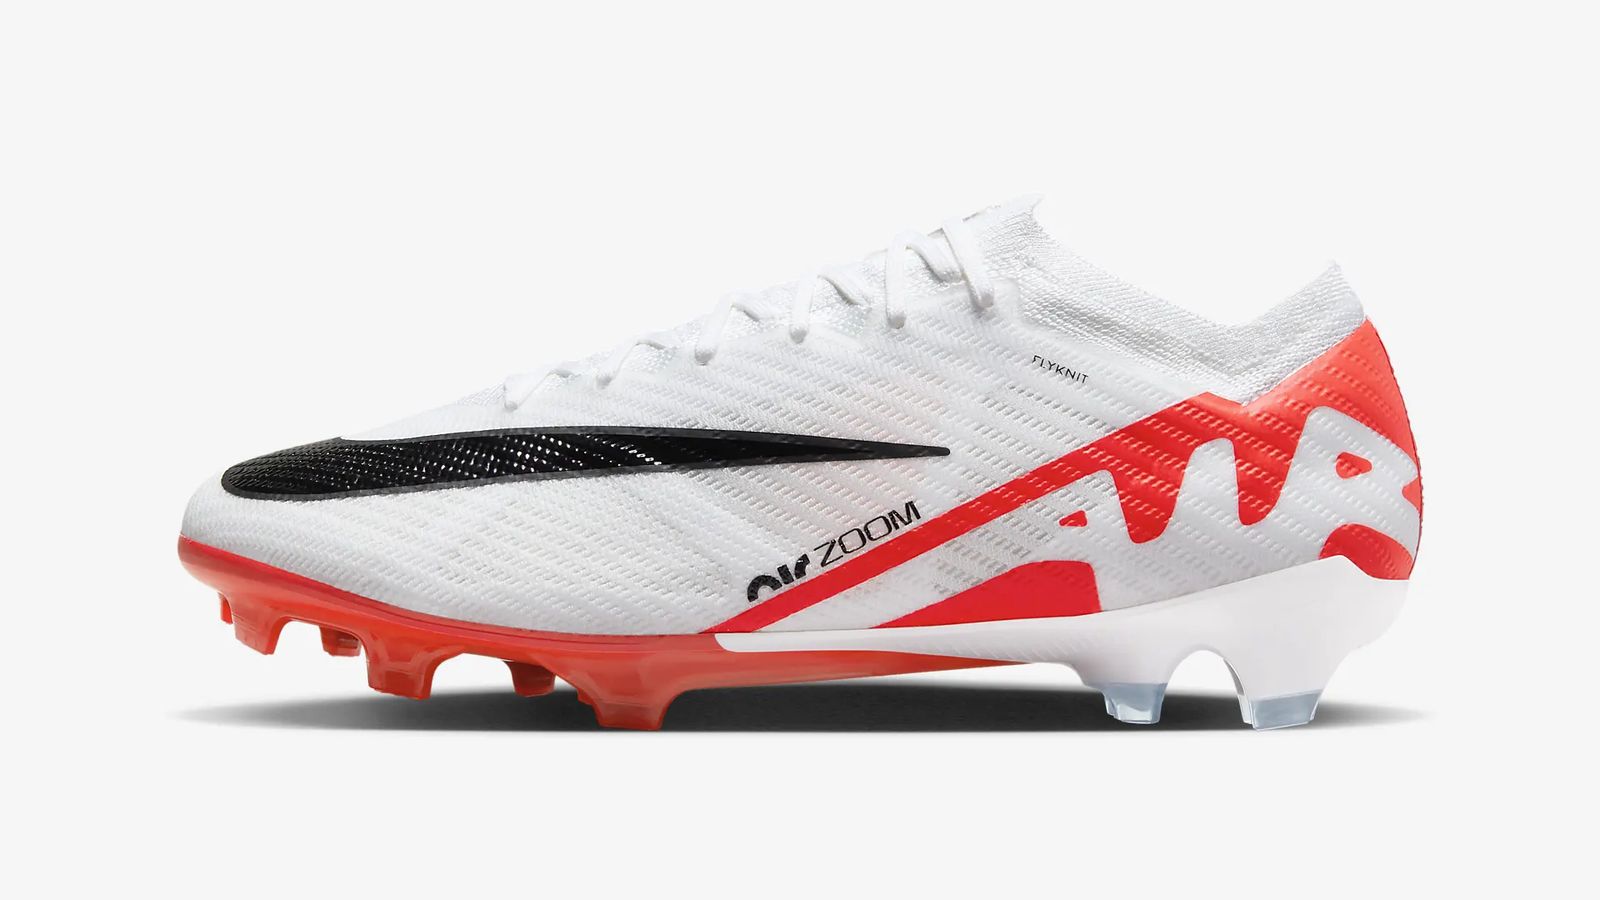 Nike Zoom Mercurial Vapor 15 Elite product image of a white boot with "Air" branding outlined in orange at the heel and an oversized black Swoosh at the front.